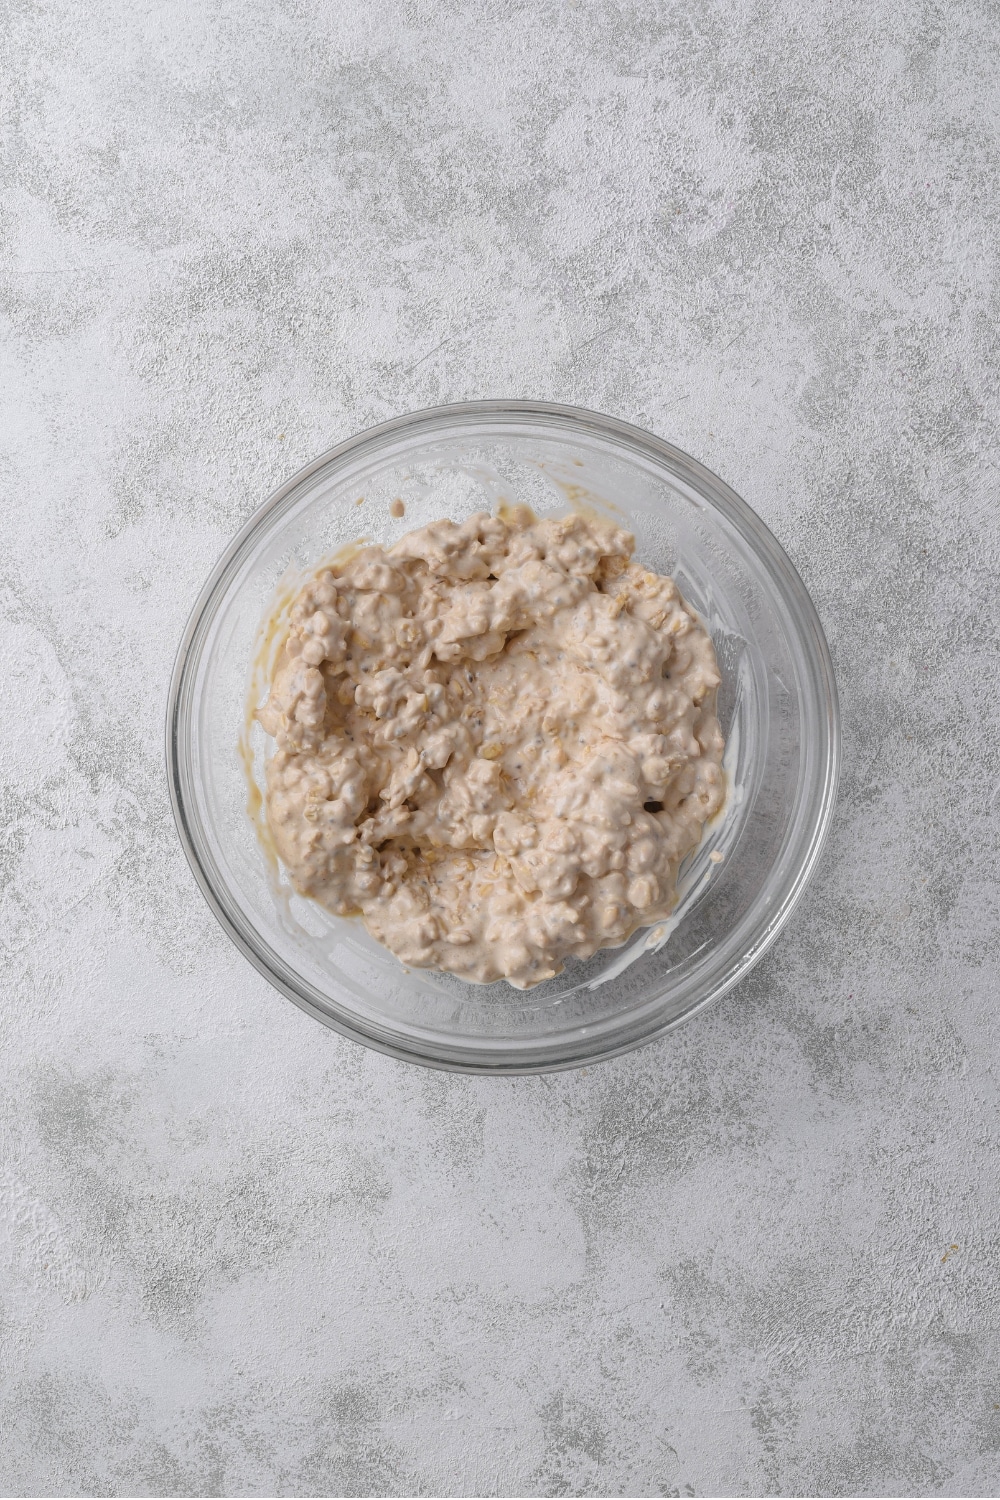 An overhead shot of a glass bowl filled with soaked peanut butter overnight oats.